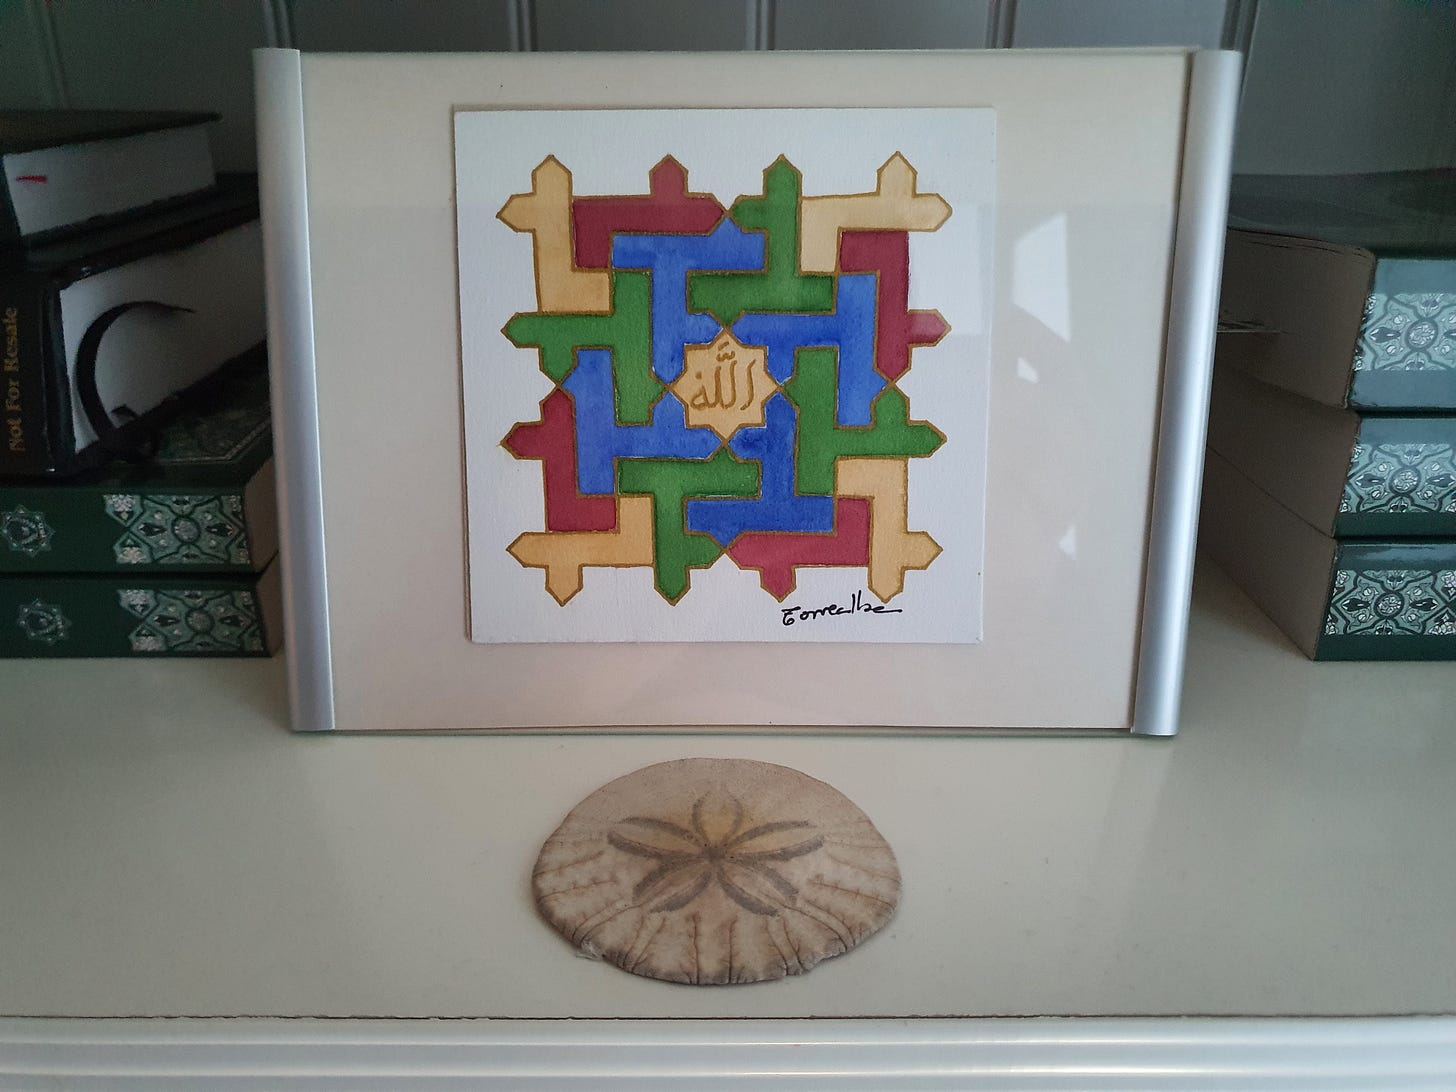 Framed image of interlocking multicolored angled lines surrounding the Name of Allah SWT in Arabic. In front, a sand dollar. In the background, books stacked horizontally. 